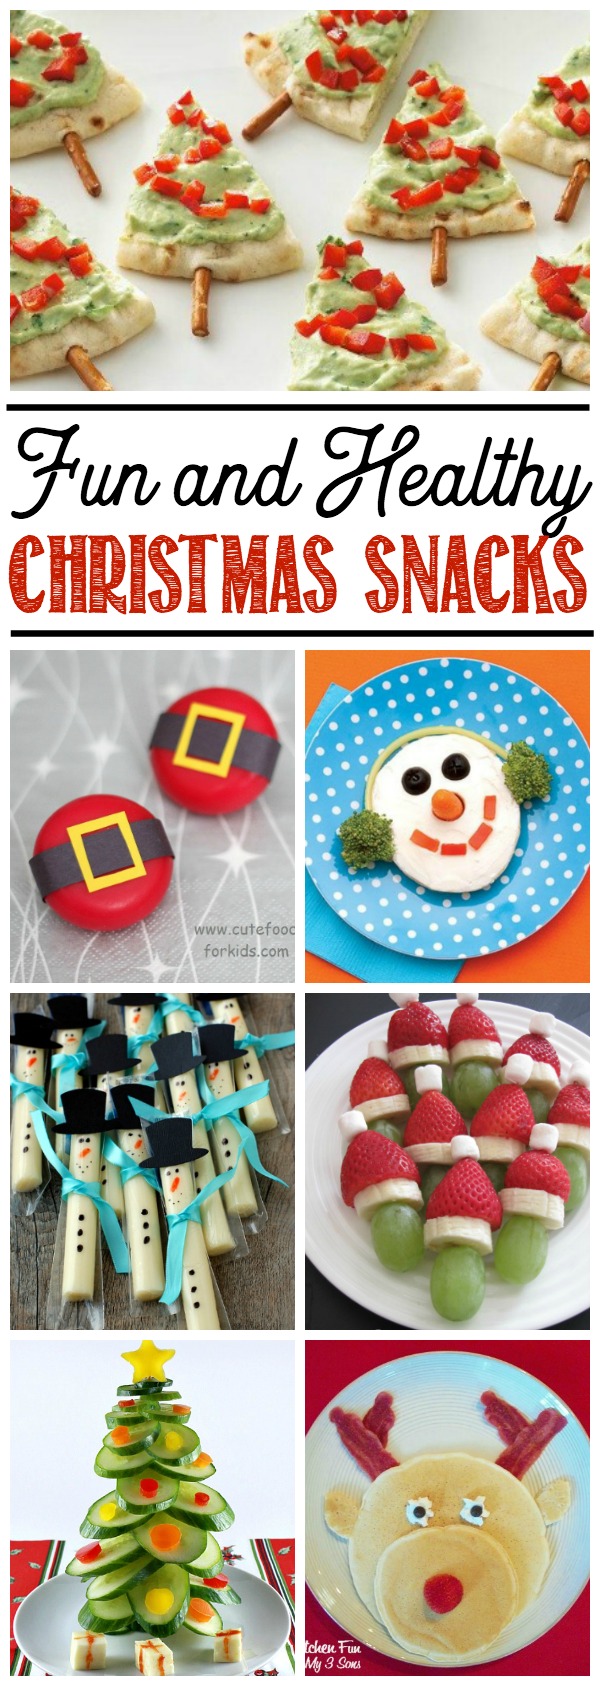 Awesome ideas for healthy Christmas snacks! Great for class parties or as an alternative to all of that holiday sugar!